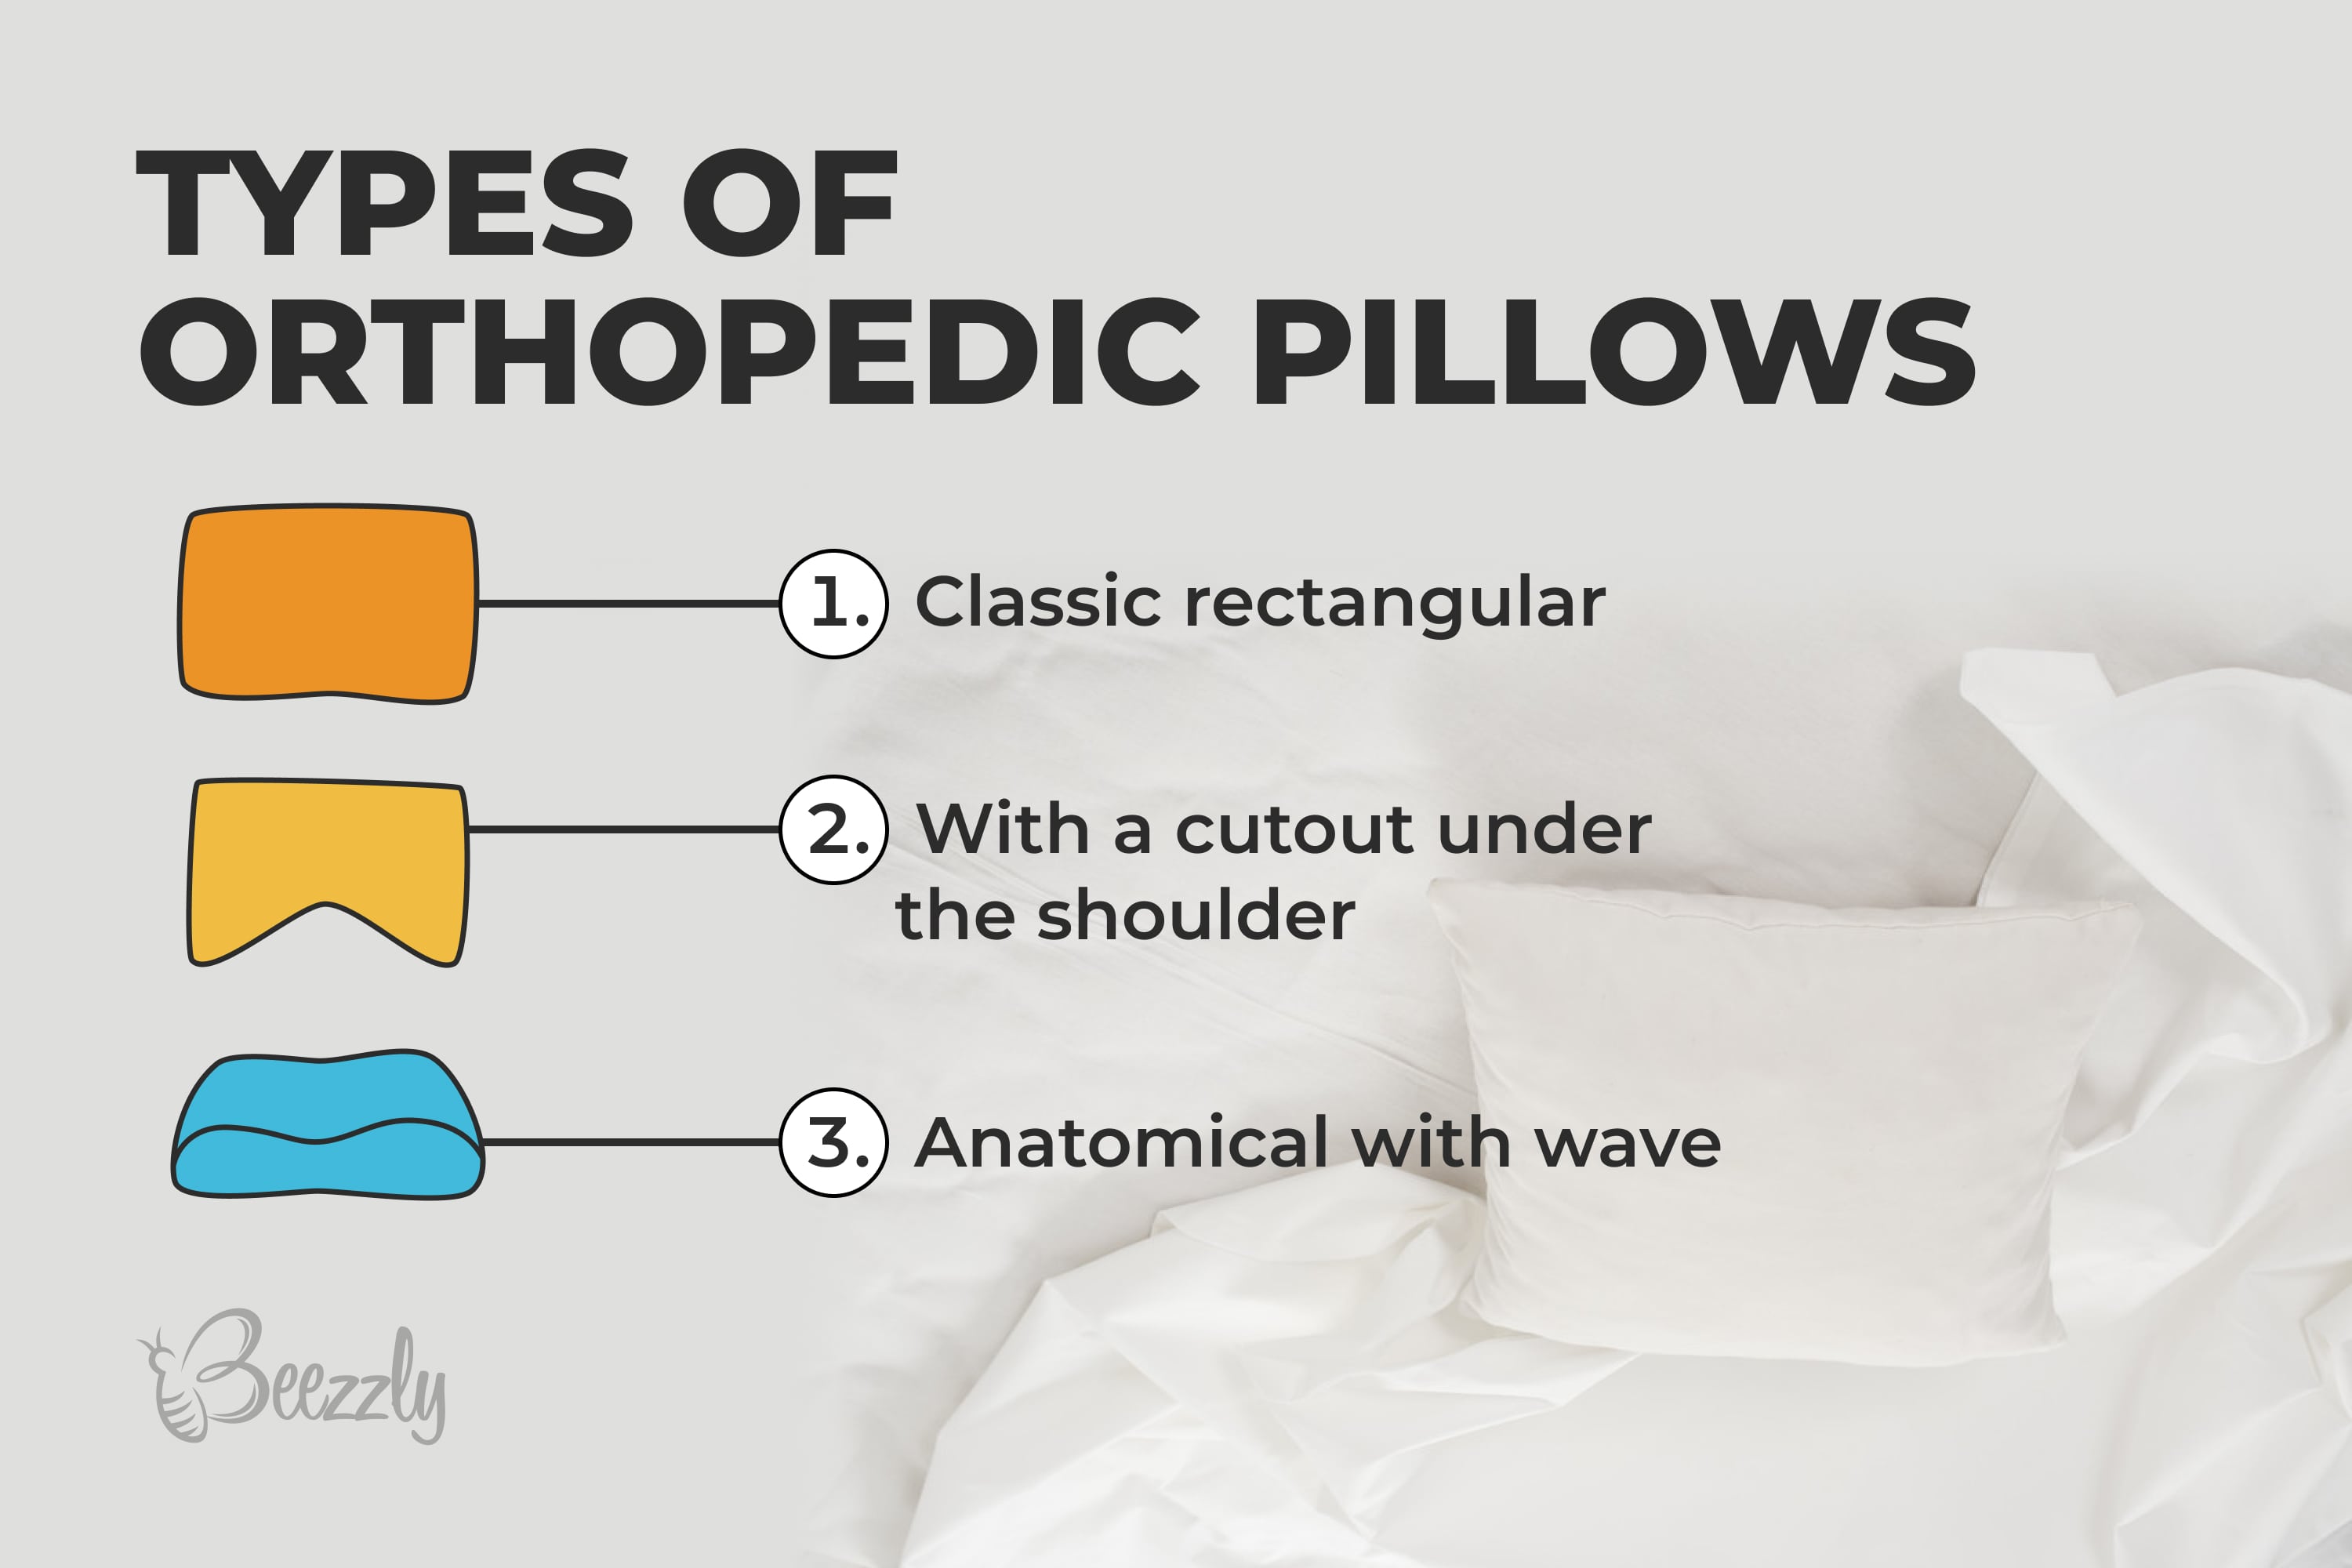 Types of orthopedic pillows